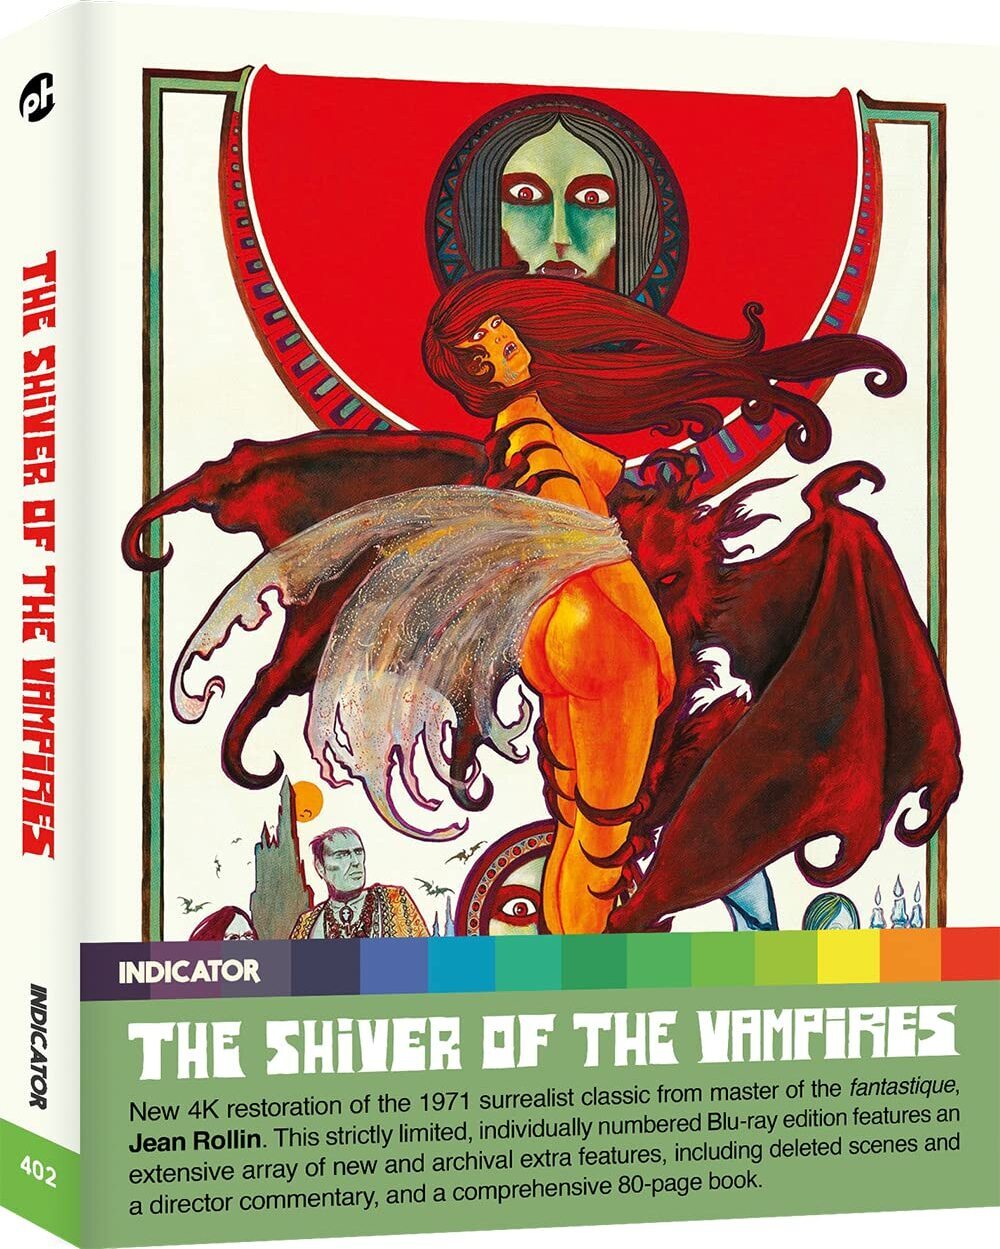 THE SHIVER OF THE VAMPIRE (LIMITED EDITION) BLU-RAY